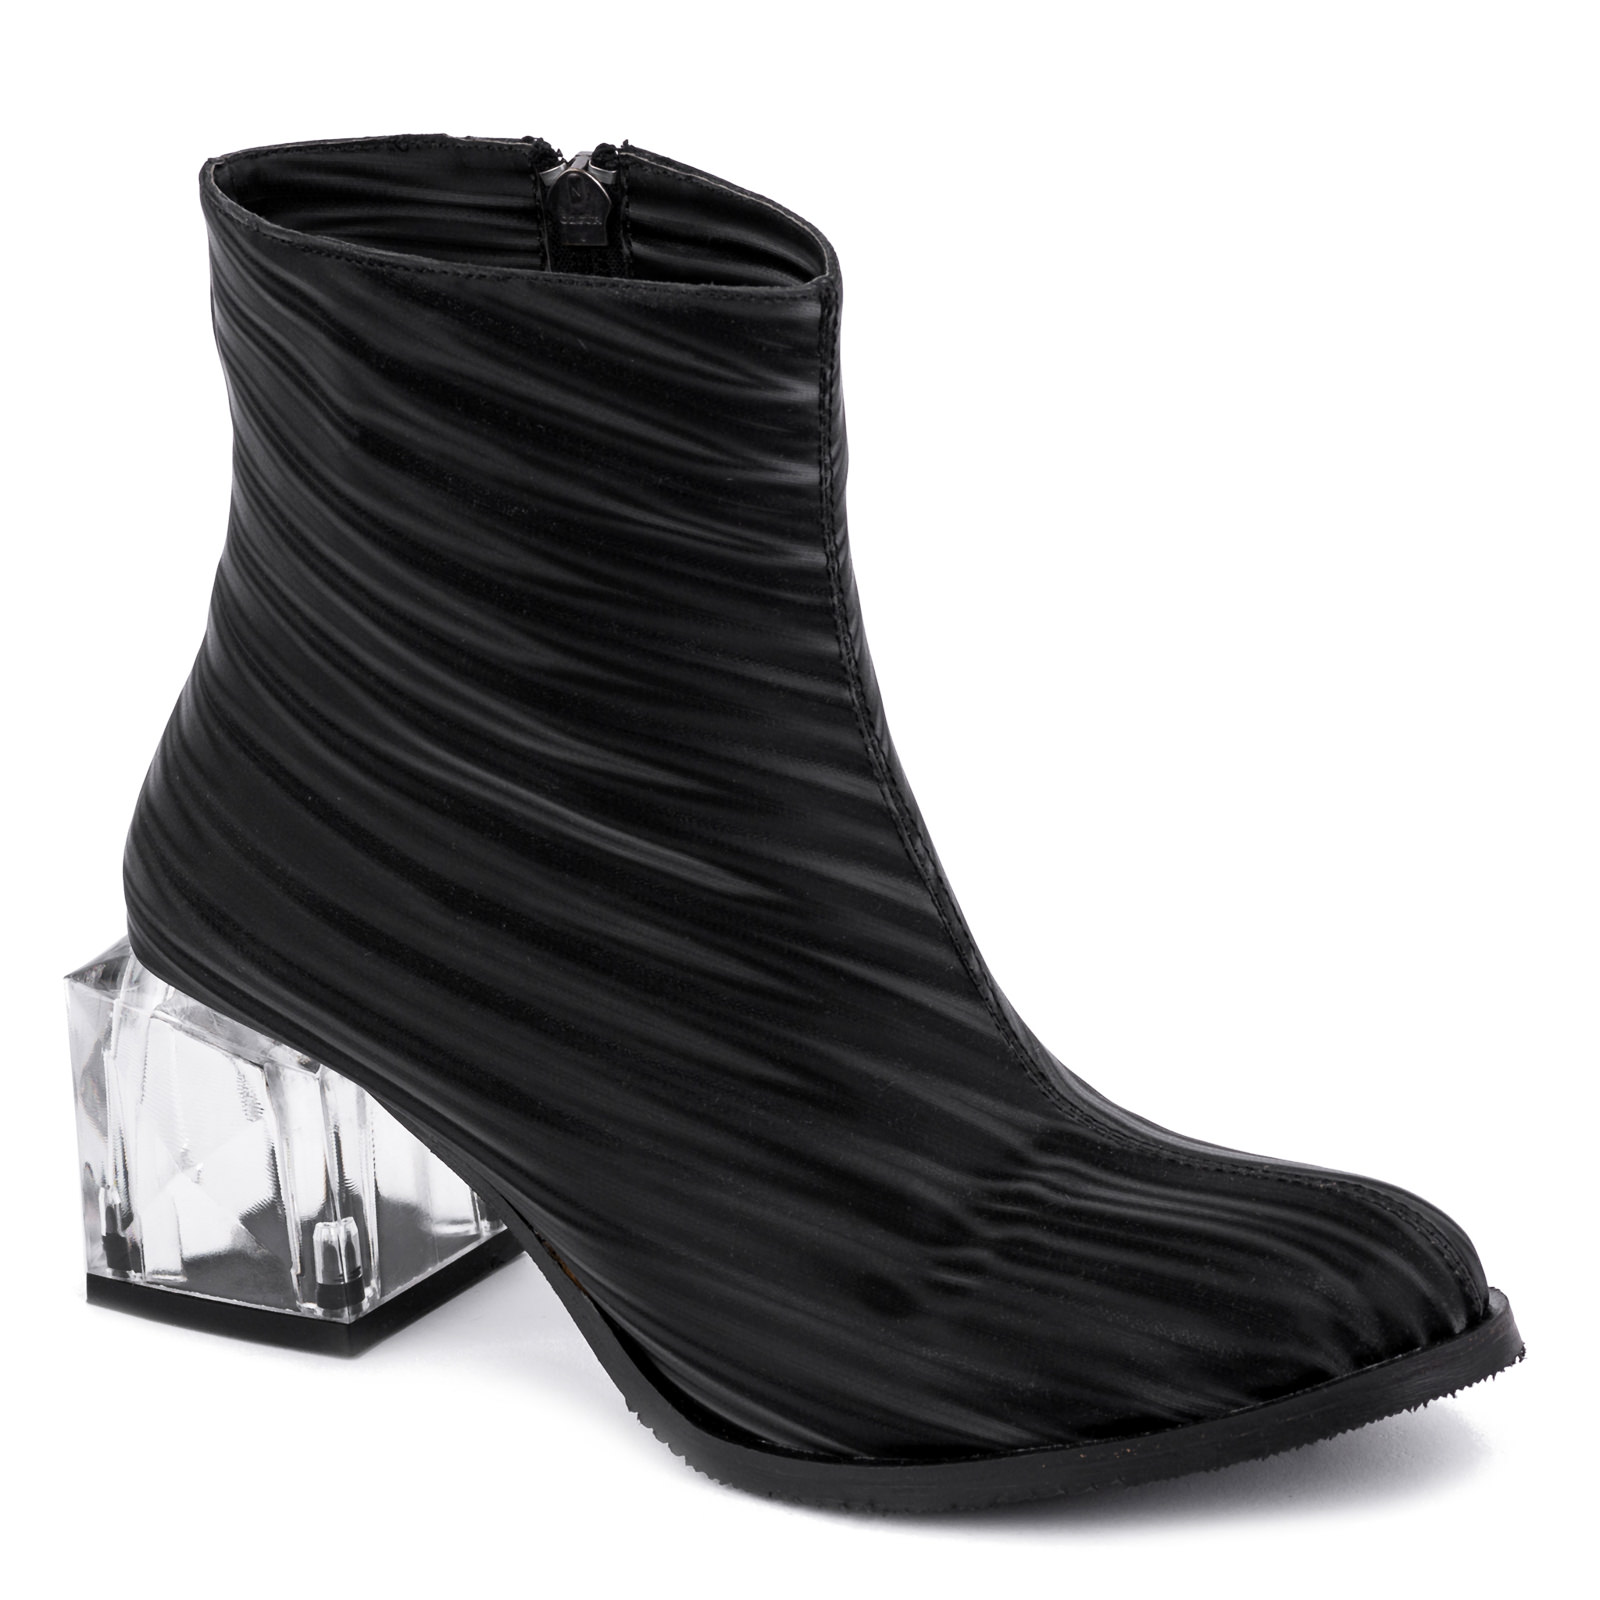 ANKLE BOOTS WITH CLEAR BLOCK HEEL - BLACK